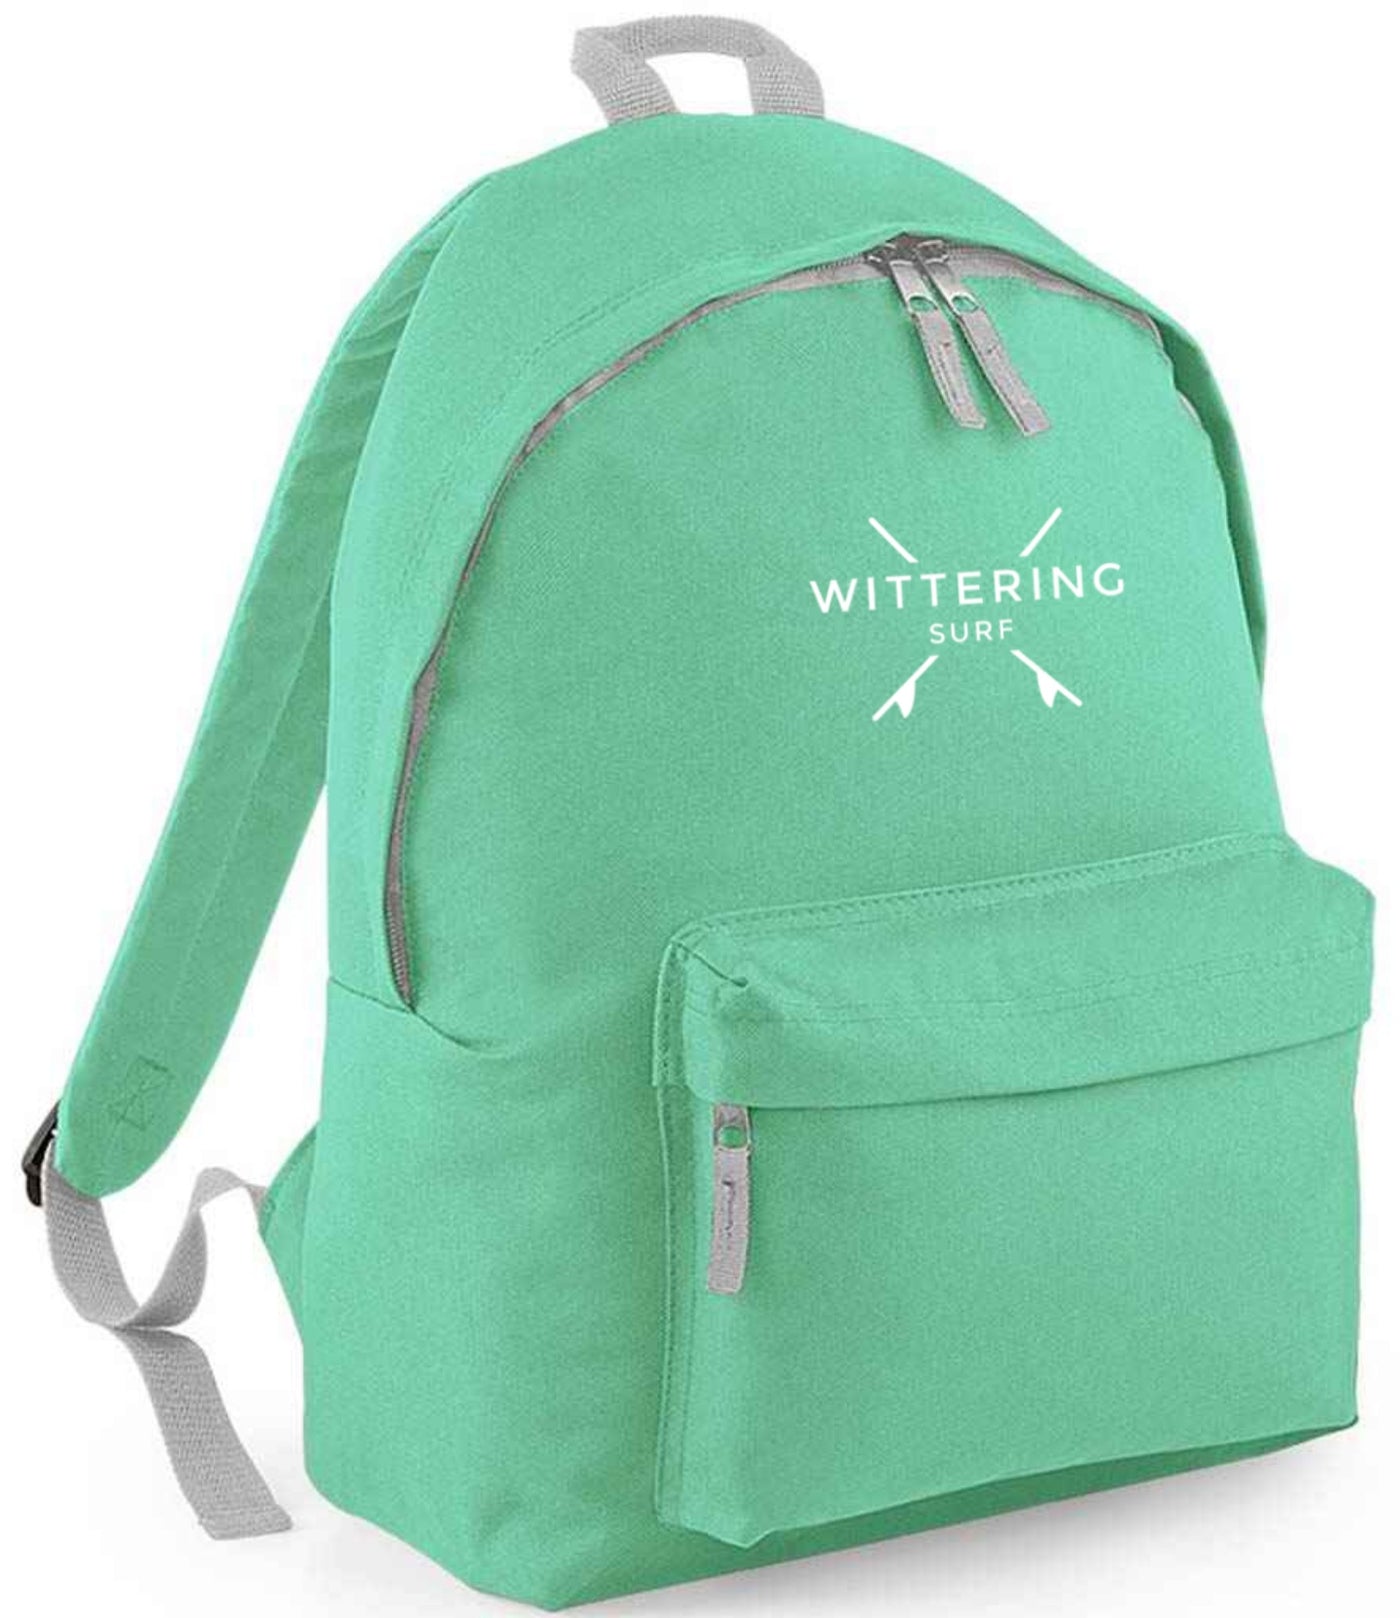 RECYCLED CAMPUS BACKPACK - MINT GREEN/GREY